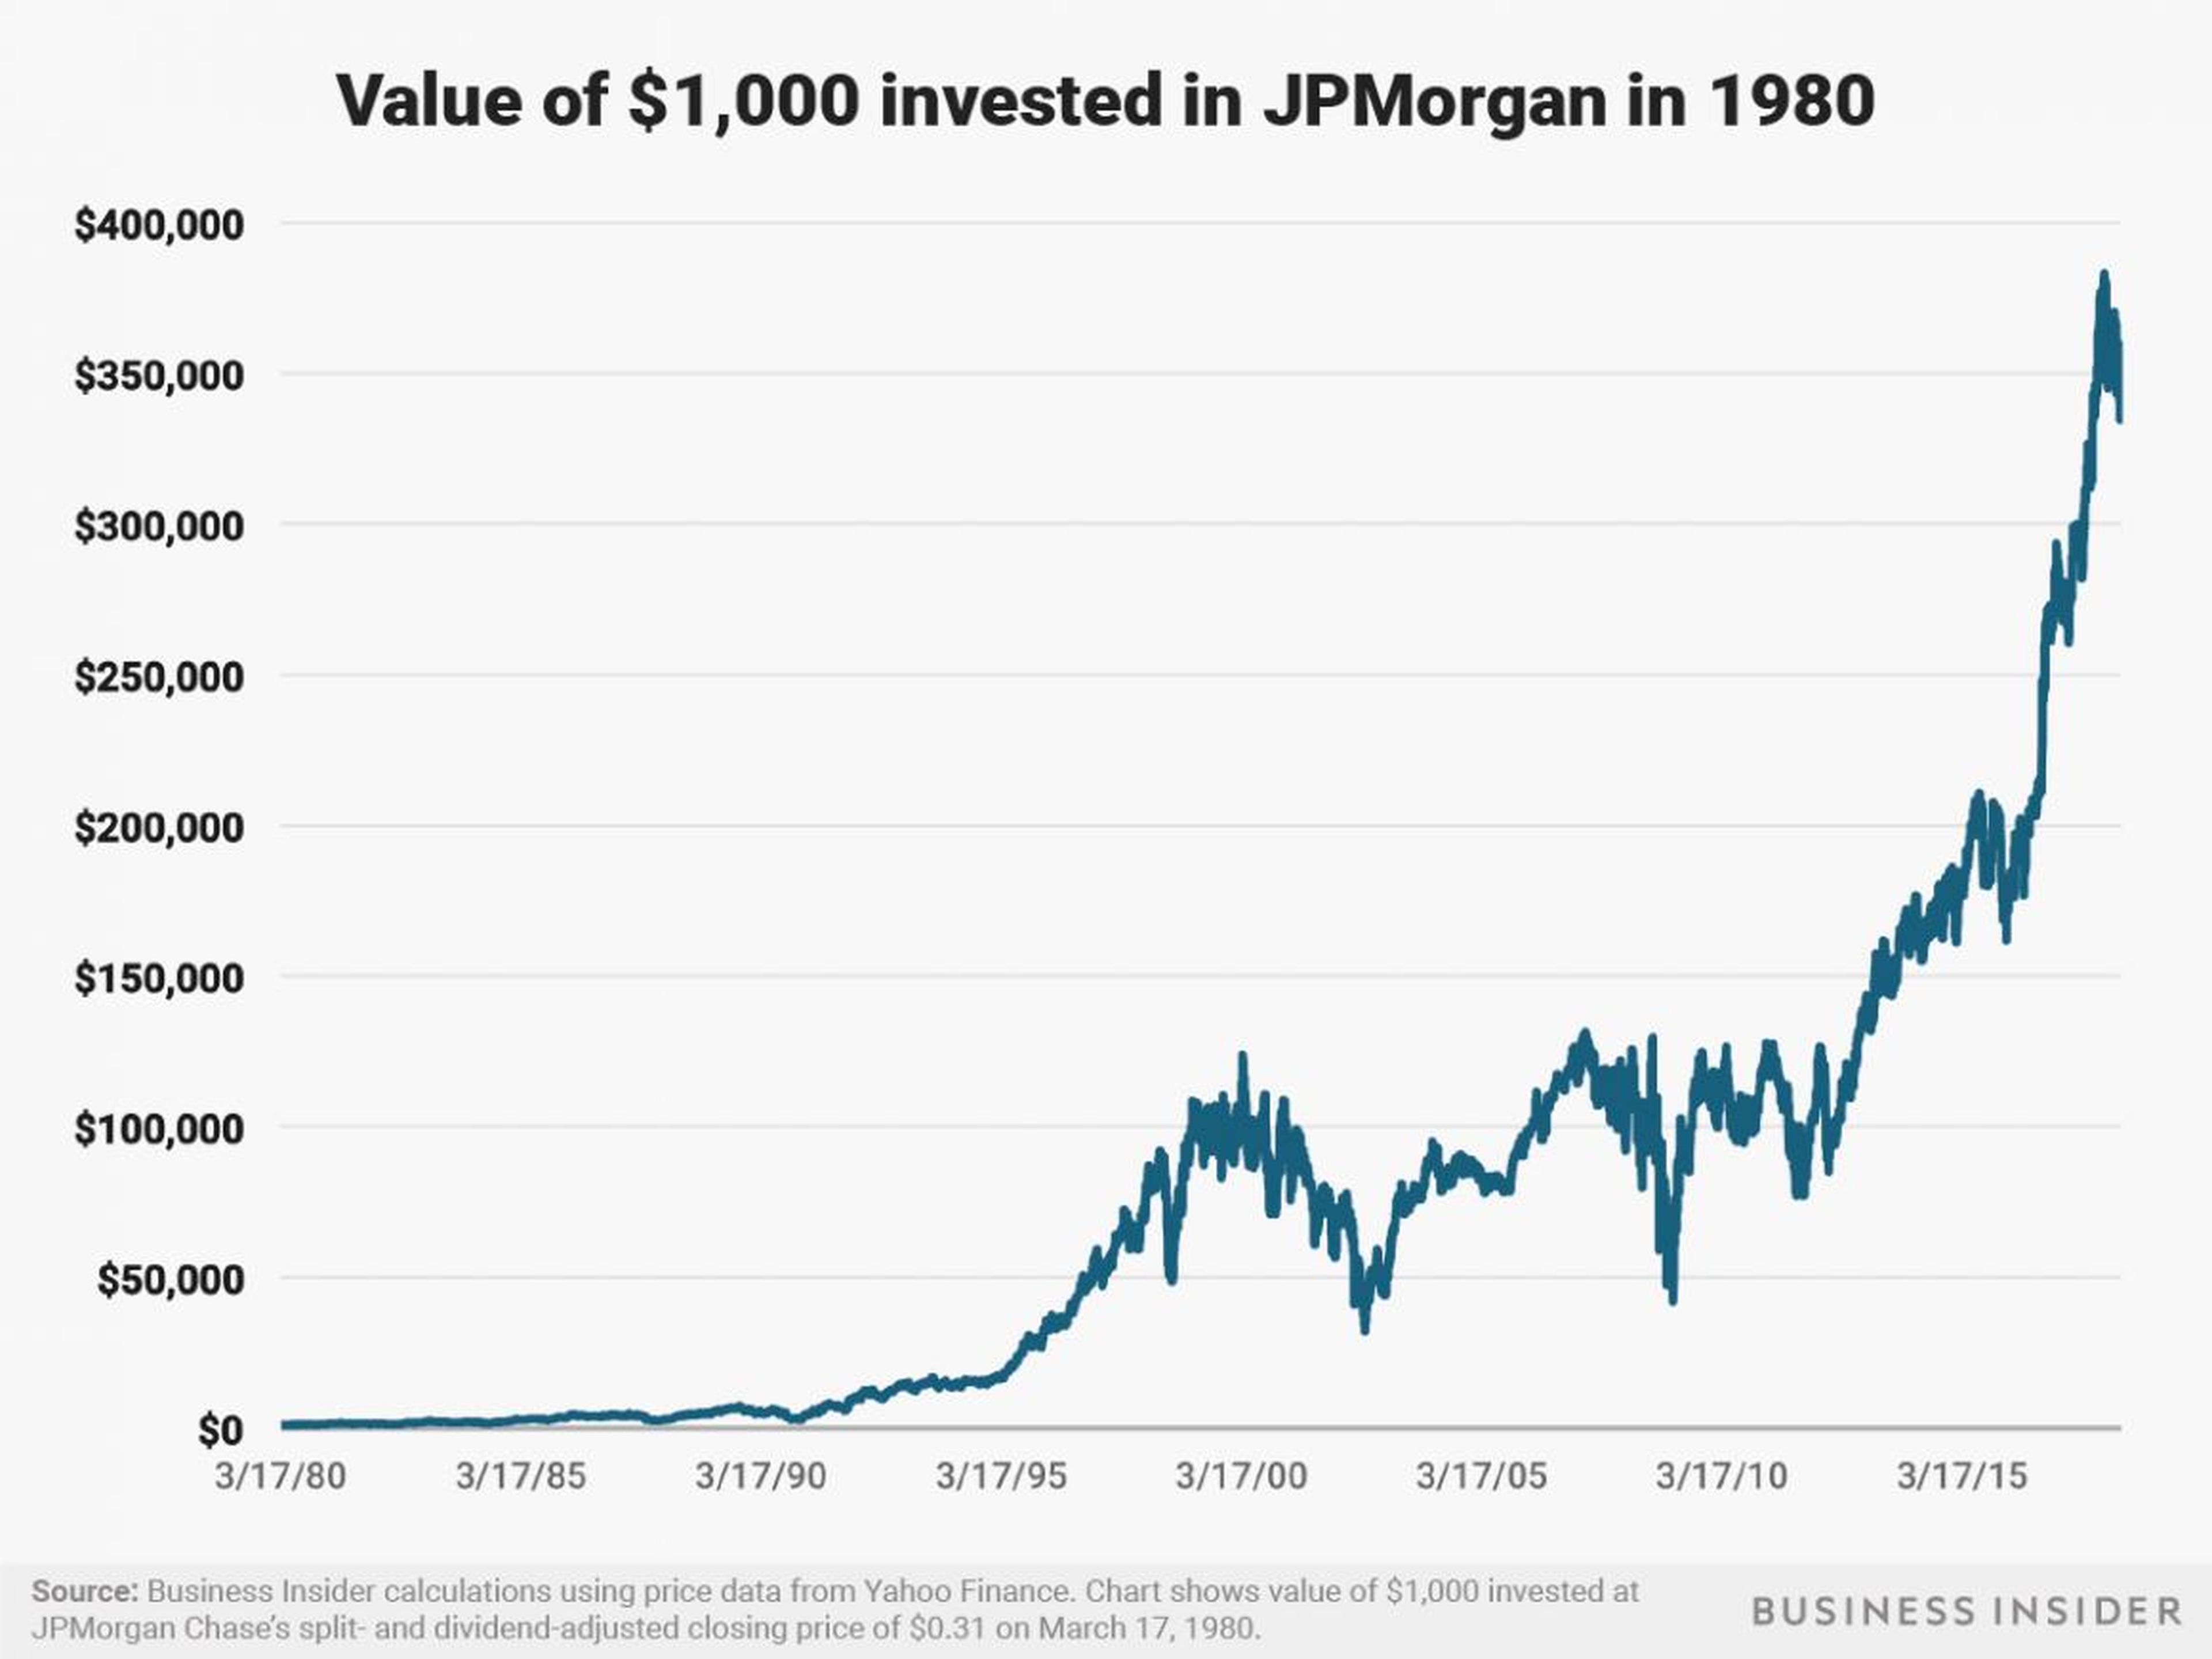 $1,000 invested in JPMorgan in 1980 would be worth over $330,000 as of July 3, 2018.